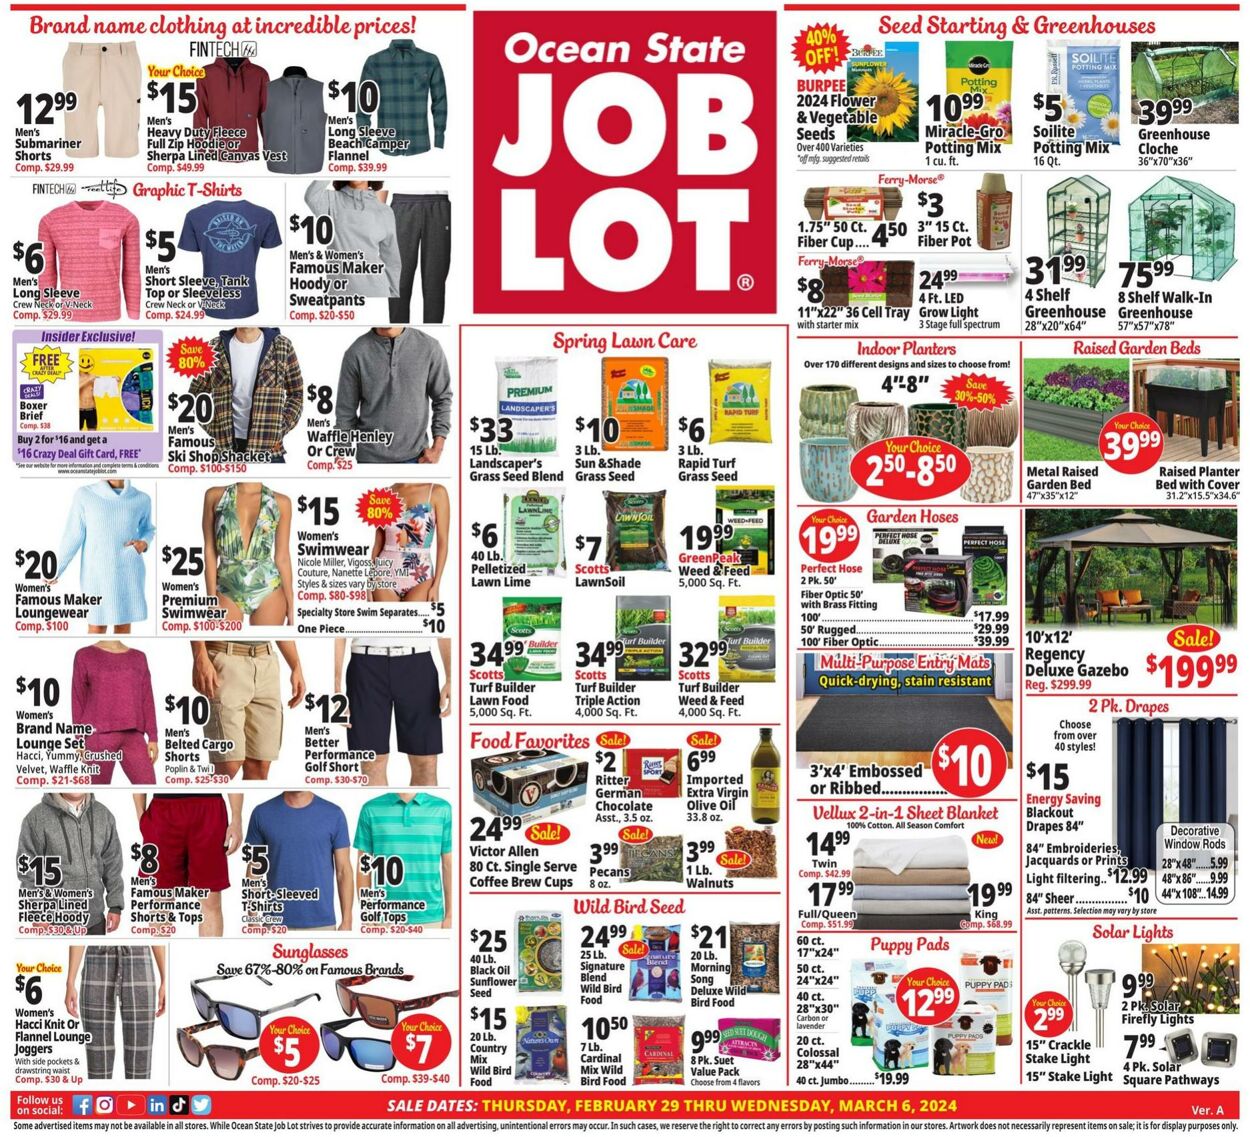 Ocean State Job Lot Promotional weekly ads